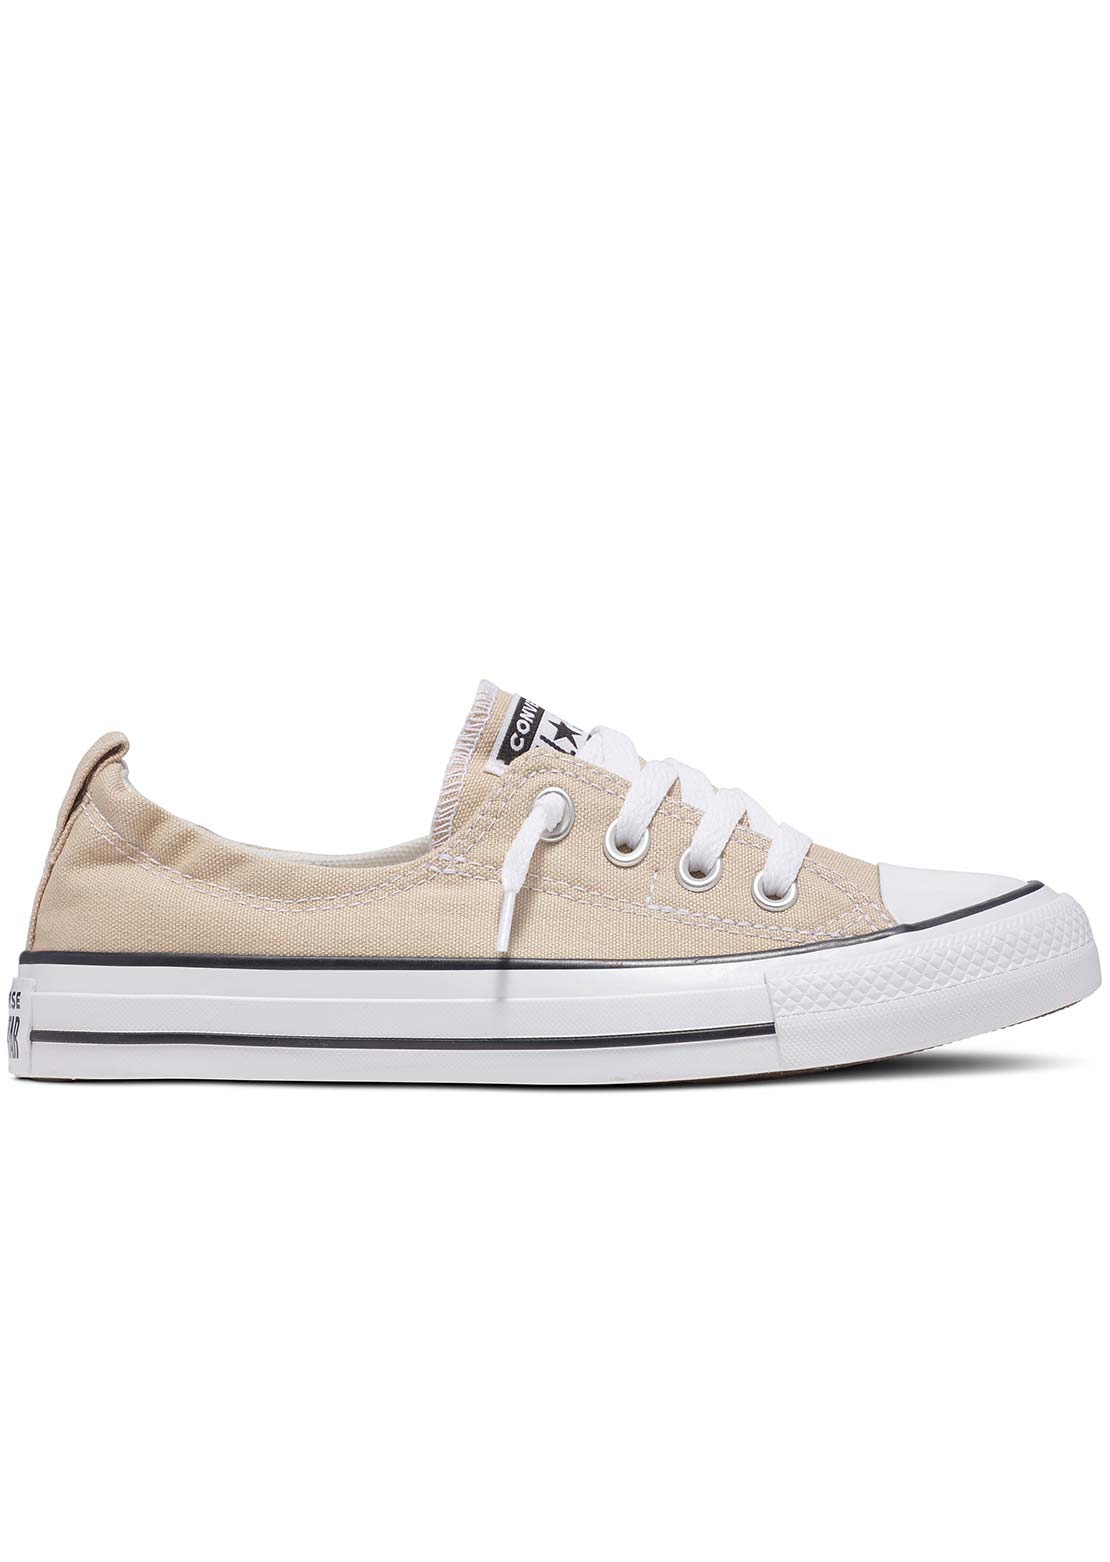 Converse Women&#39;s Chuck Taylor All Star Lift Shoreline Low Top Shoes Nutty Granola/White/Black